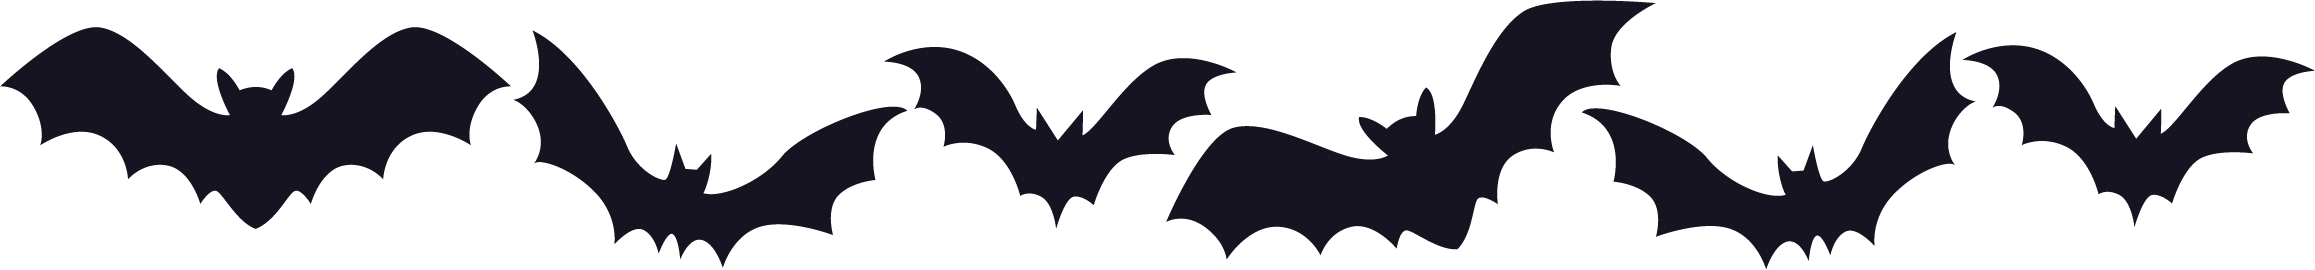 Halloween Bats Png images collection for free download.